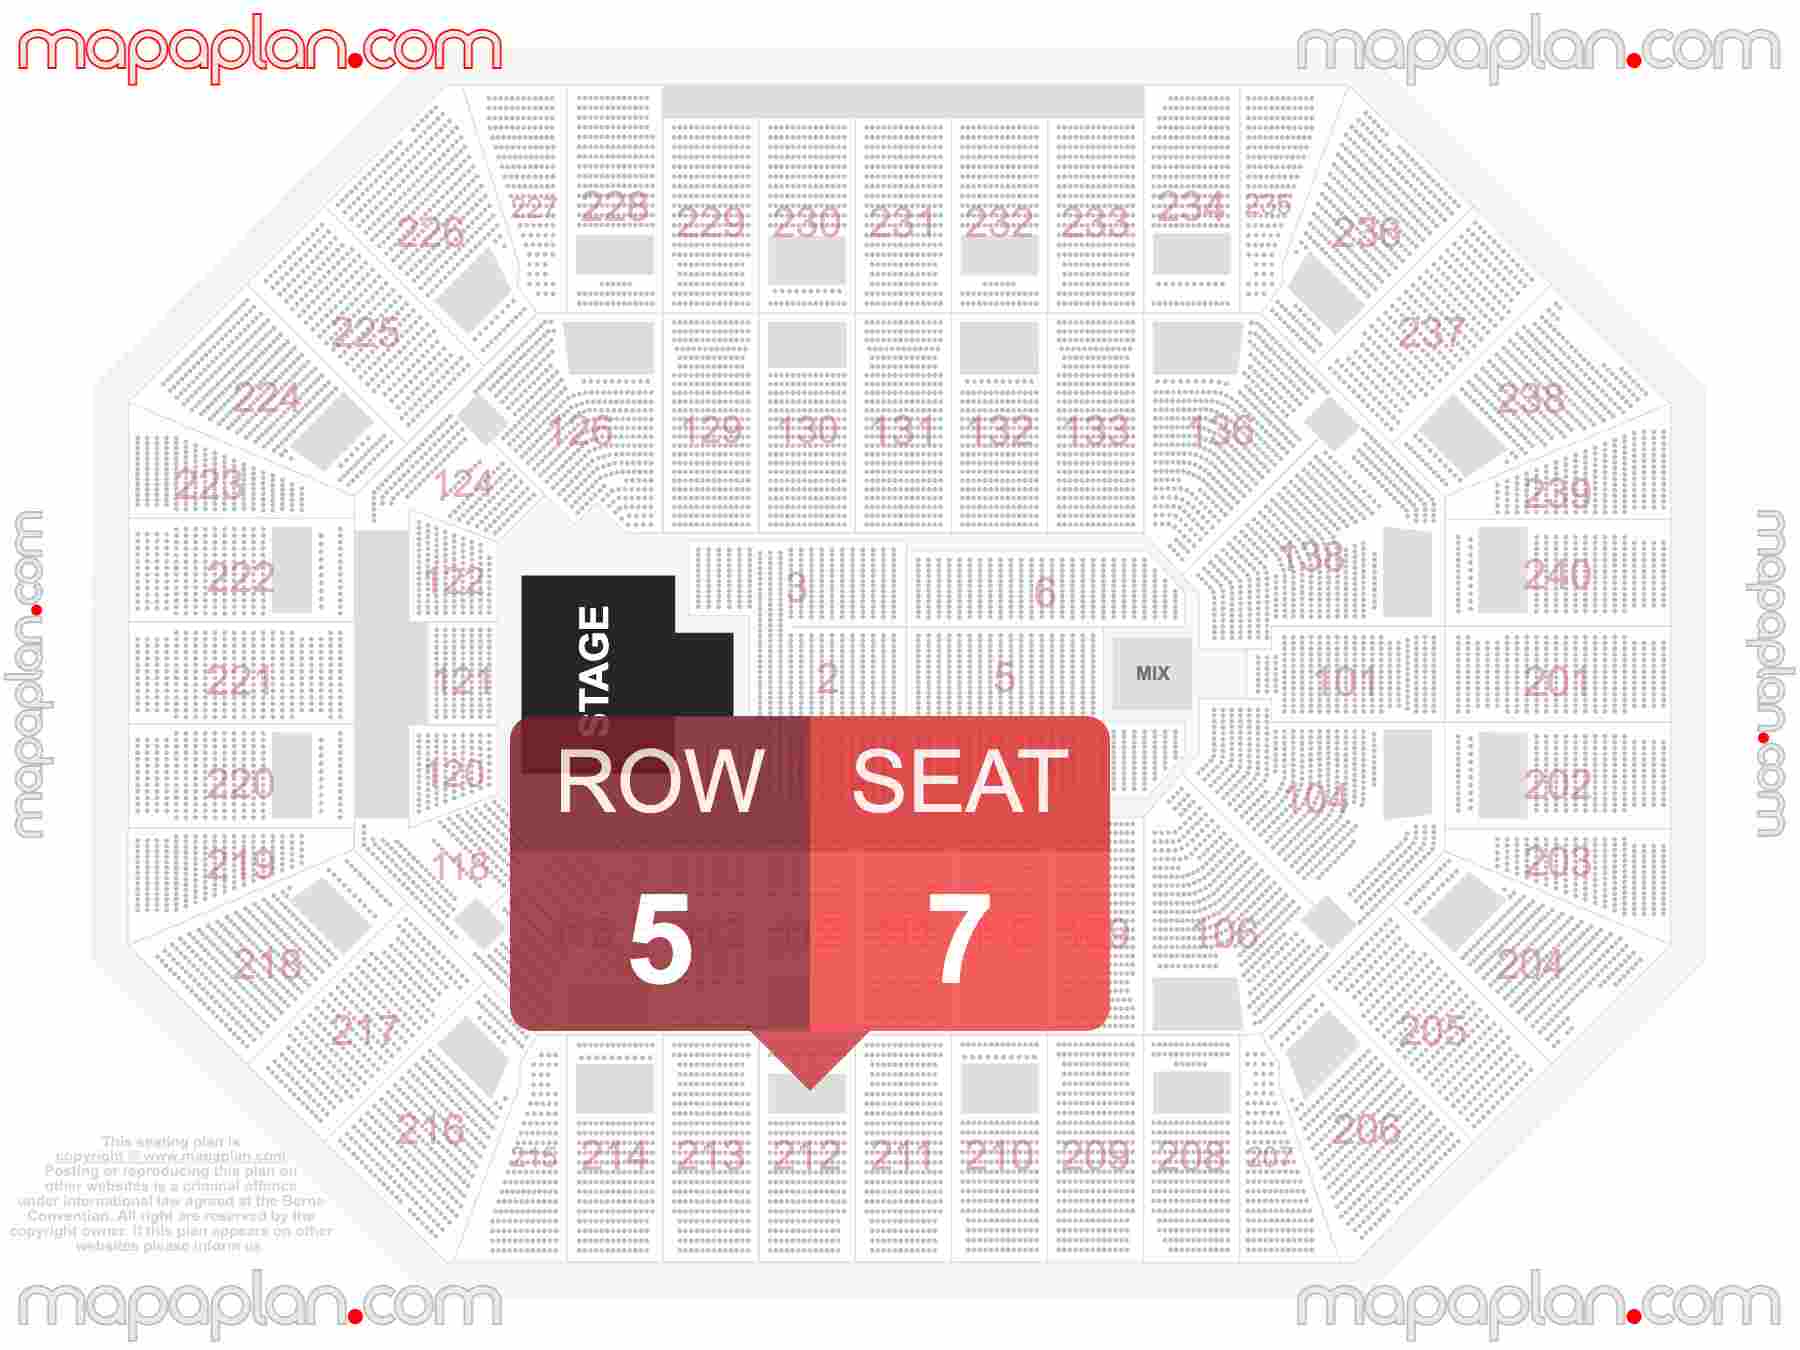 Minneapolis Target Center seating chart Concert detailed seat numbers and row numbering chart with interactive map plan layout